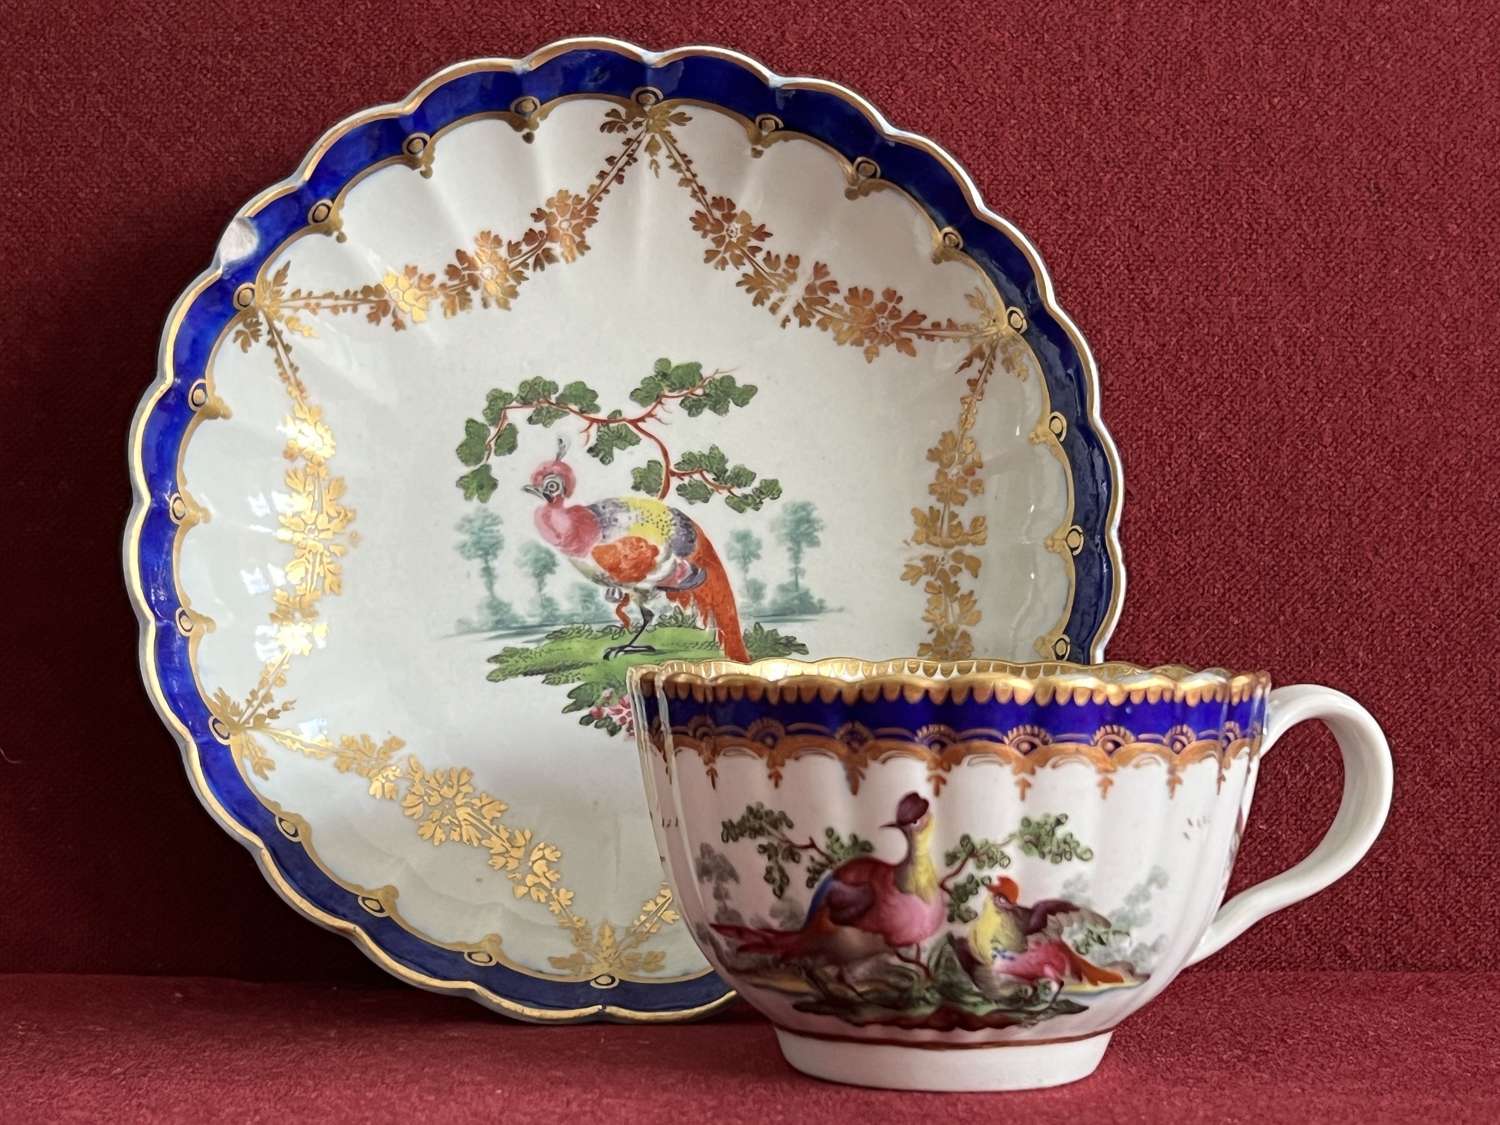 A Worcester Porcelain Teacup & Saucer decorated with Fancy Birds c1770